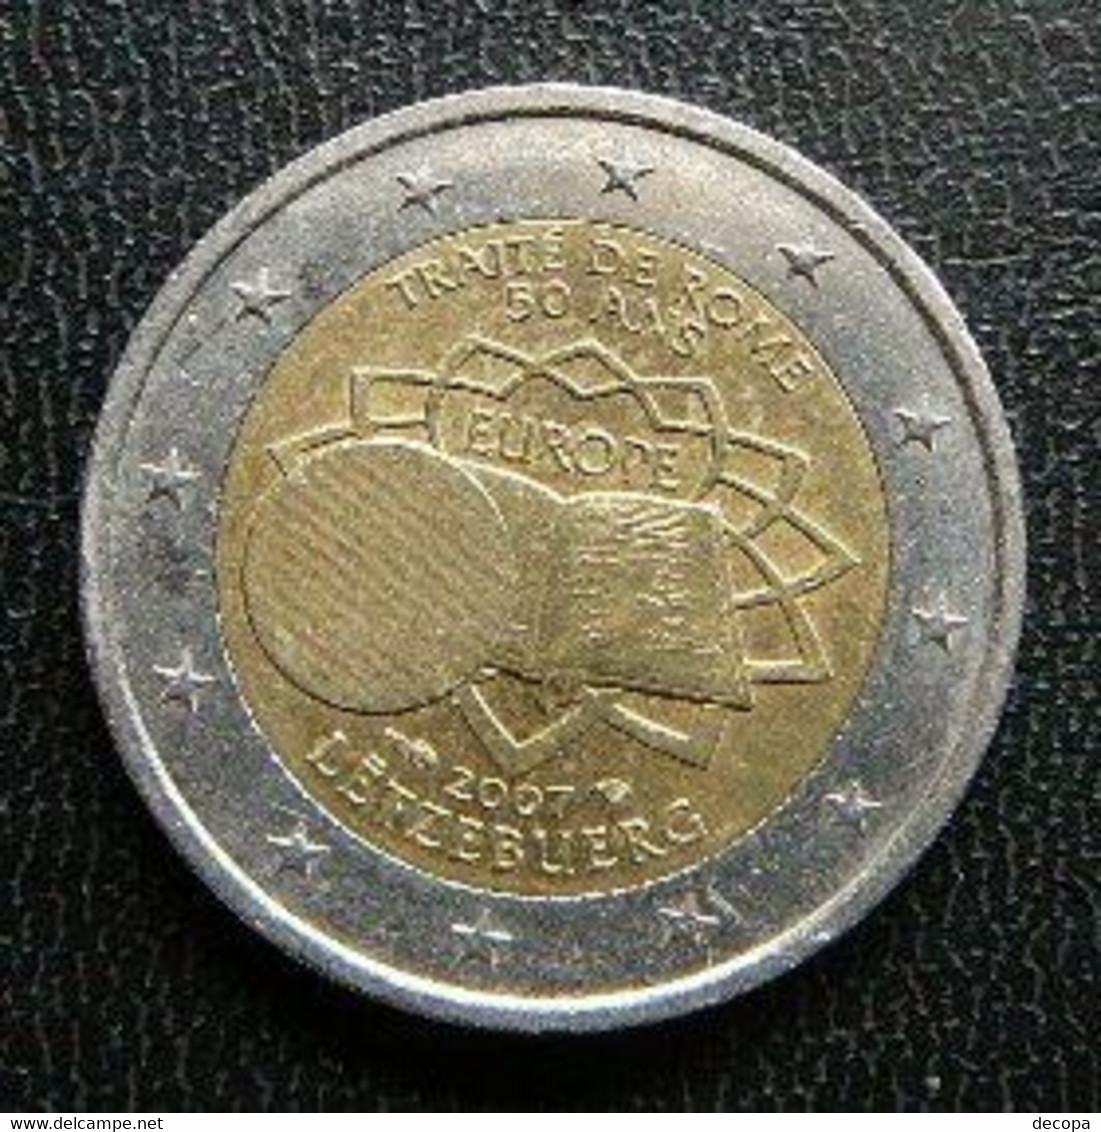 Luxemburg  - Luxembourg   2 EURO 2007     Speciale Uitgave - Commemorative - Luxemburg